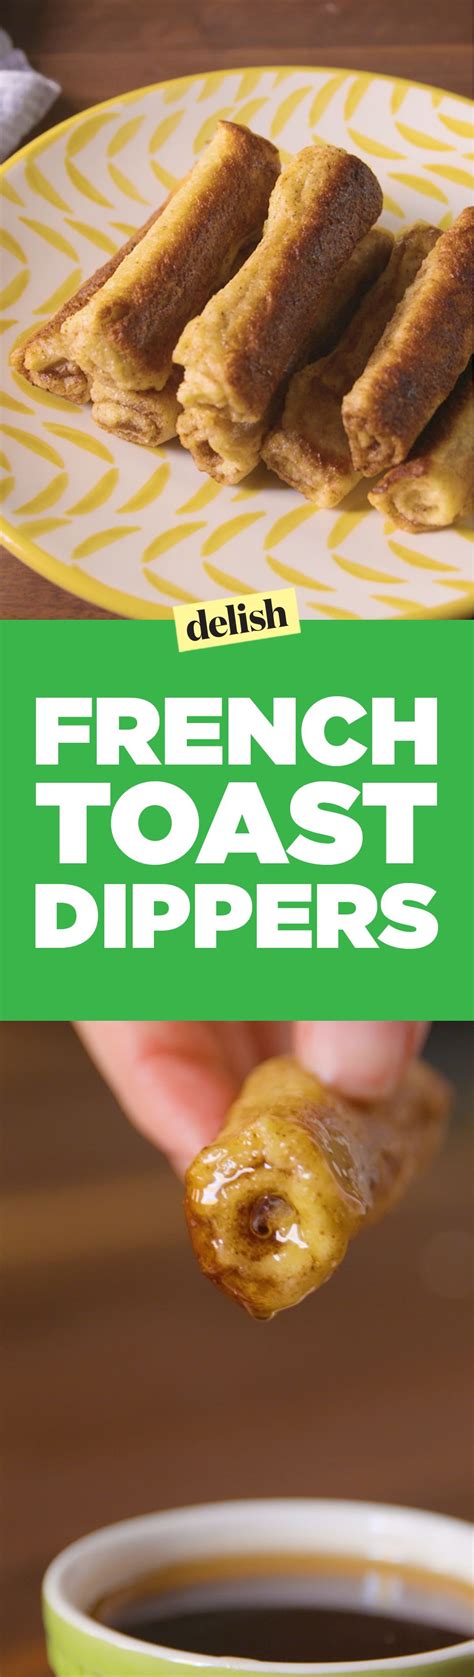 French Toast Dippers Recipe Favorite Recipes Breakfast Recipes